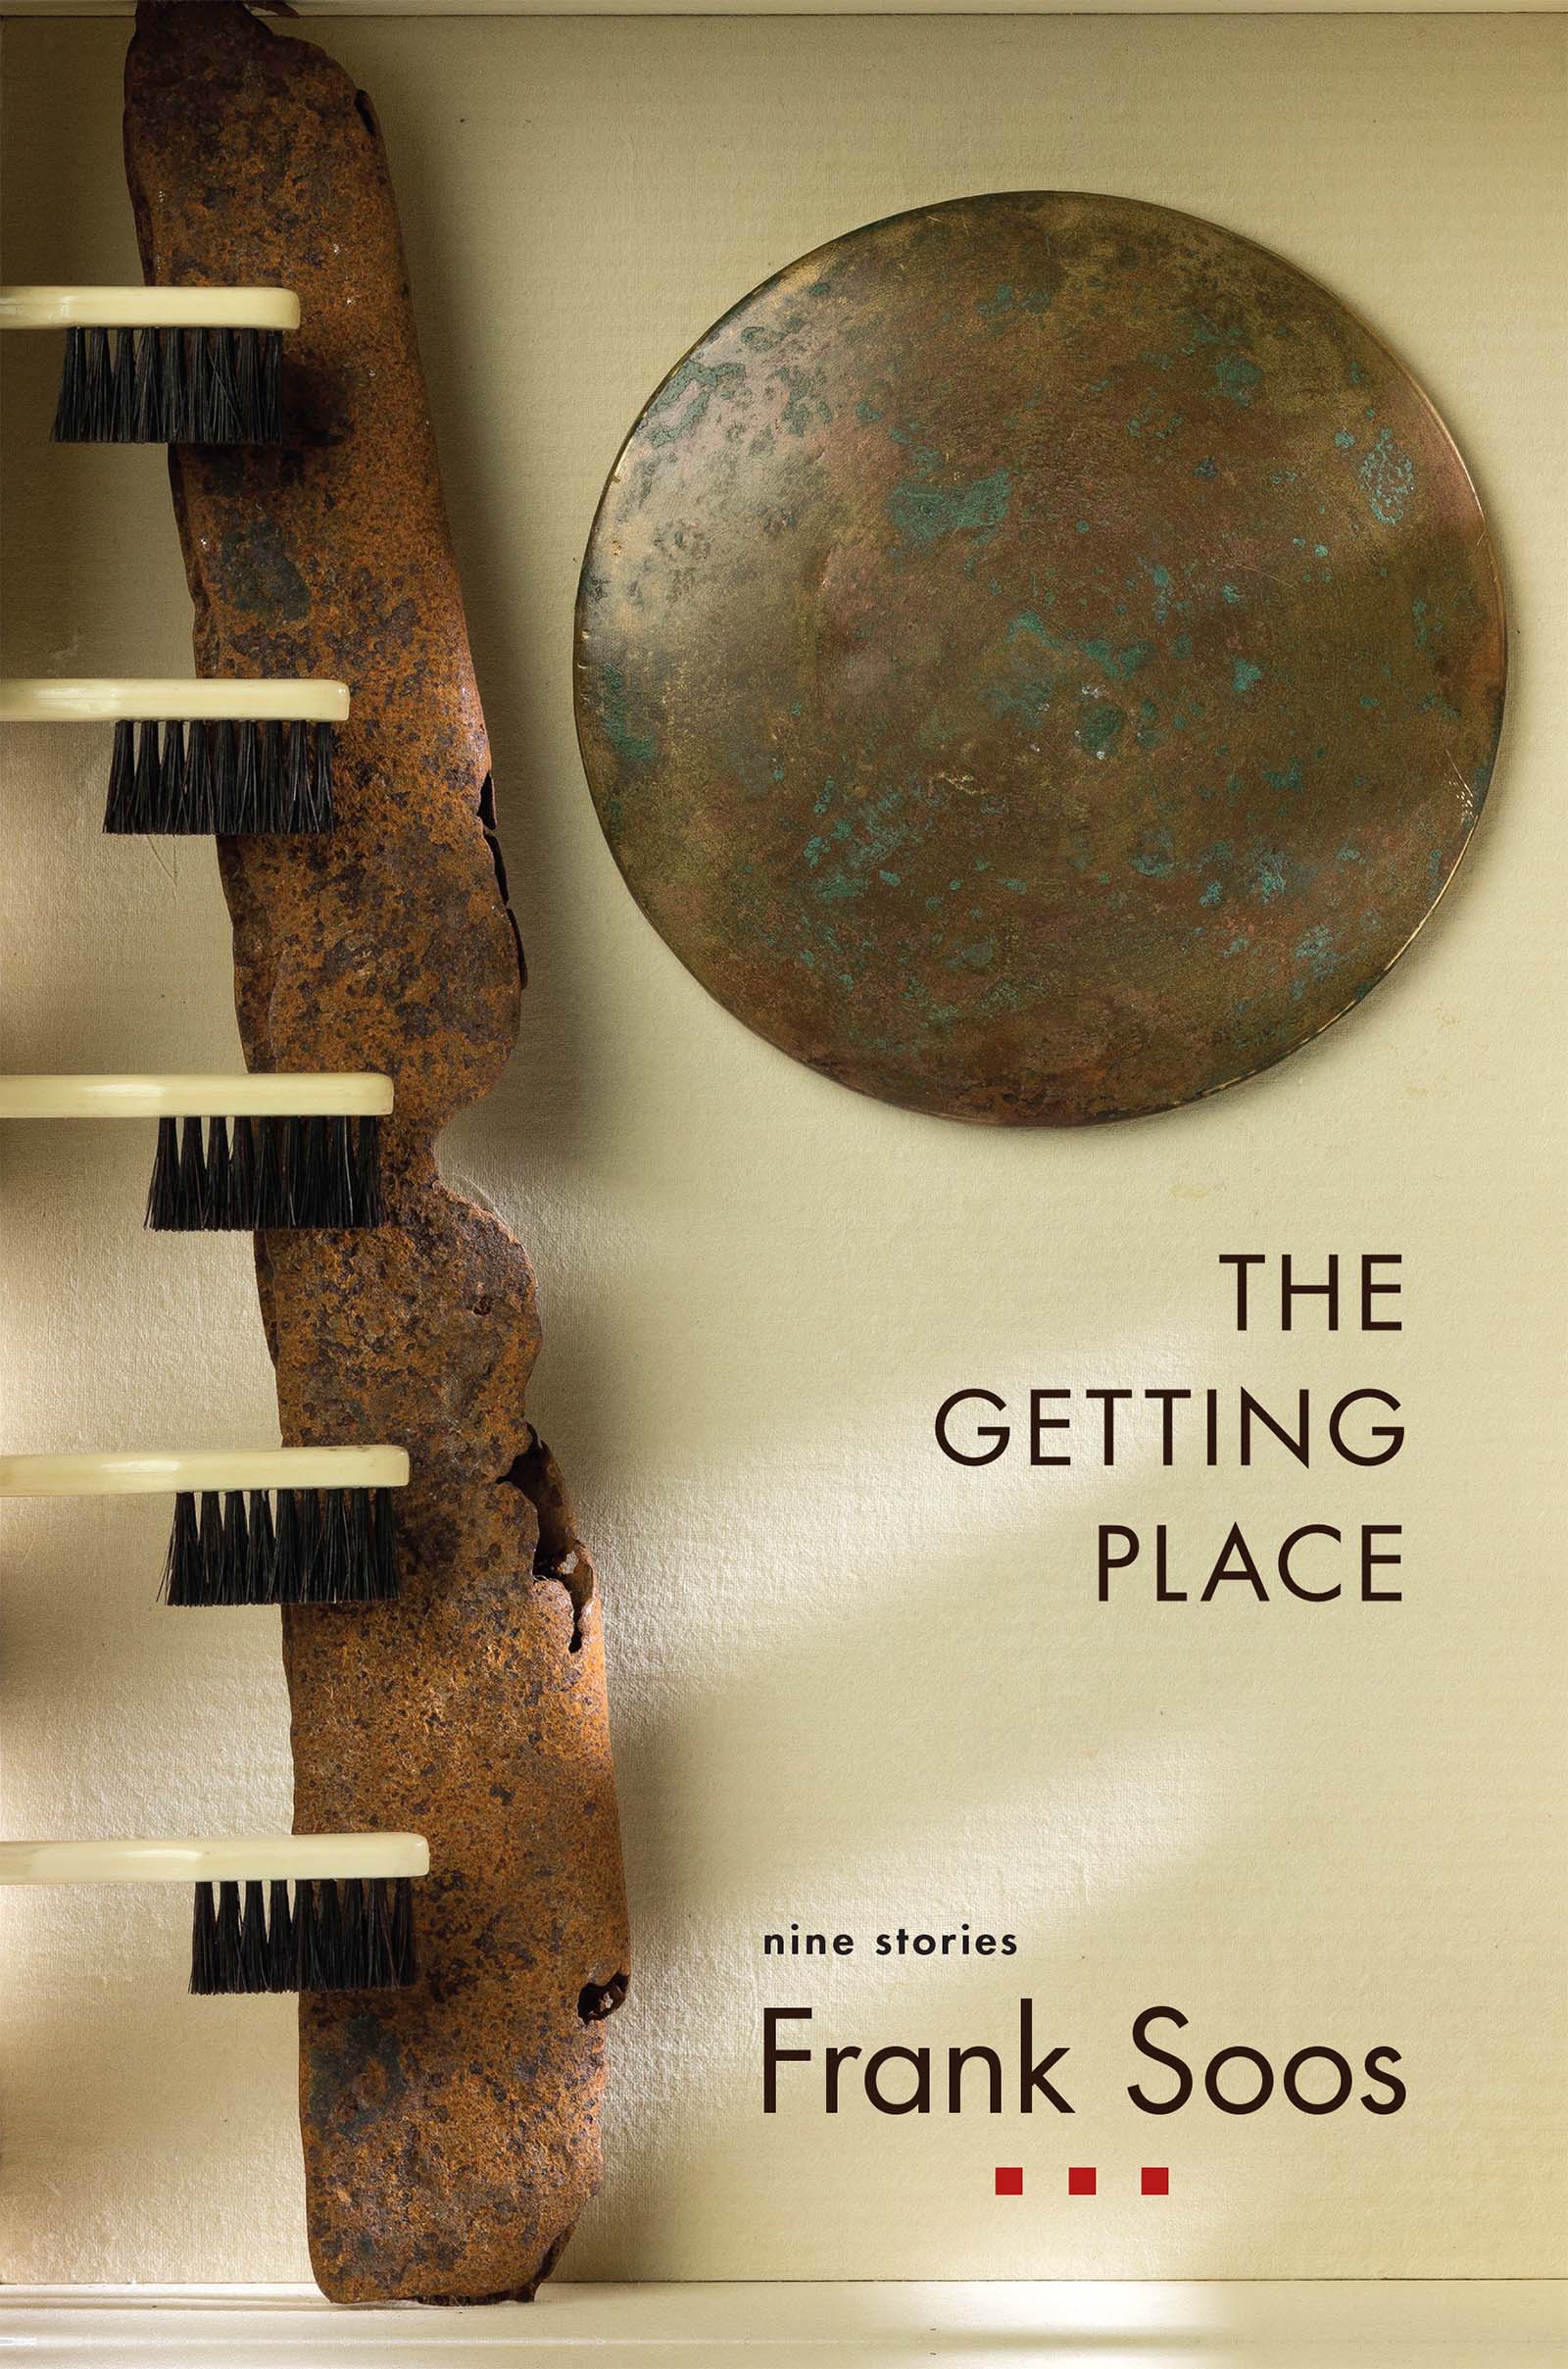 Artwork titled "Winter Birch" by Margo Klass depicts a photograph of five ascending toothbrush heads equidistant to each other, in front of a piece of petrified birch wood and a rusting metal disk with brown text stating "The Getting Place", nine stories by Frank Soos